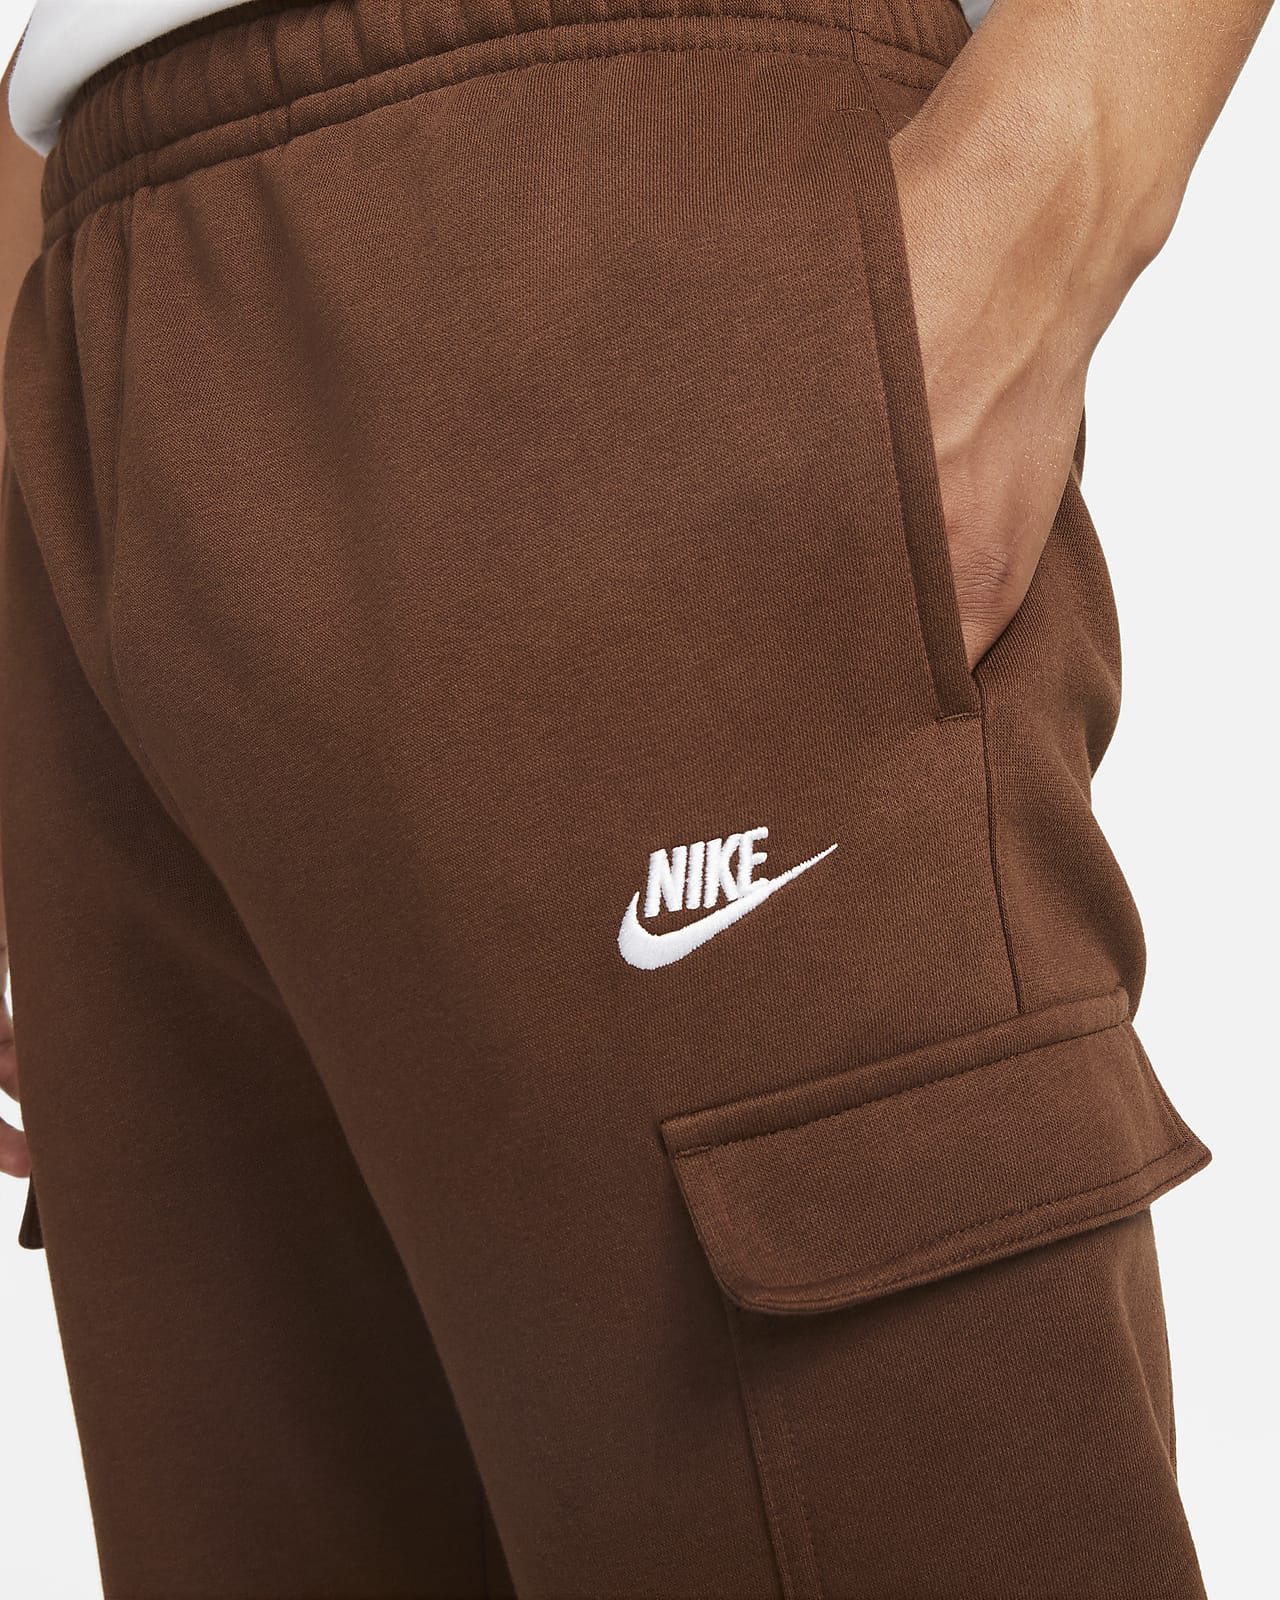 Nike Athletic Pants Men's Black New with Tags S 877